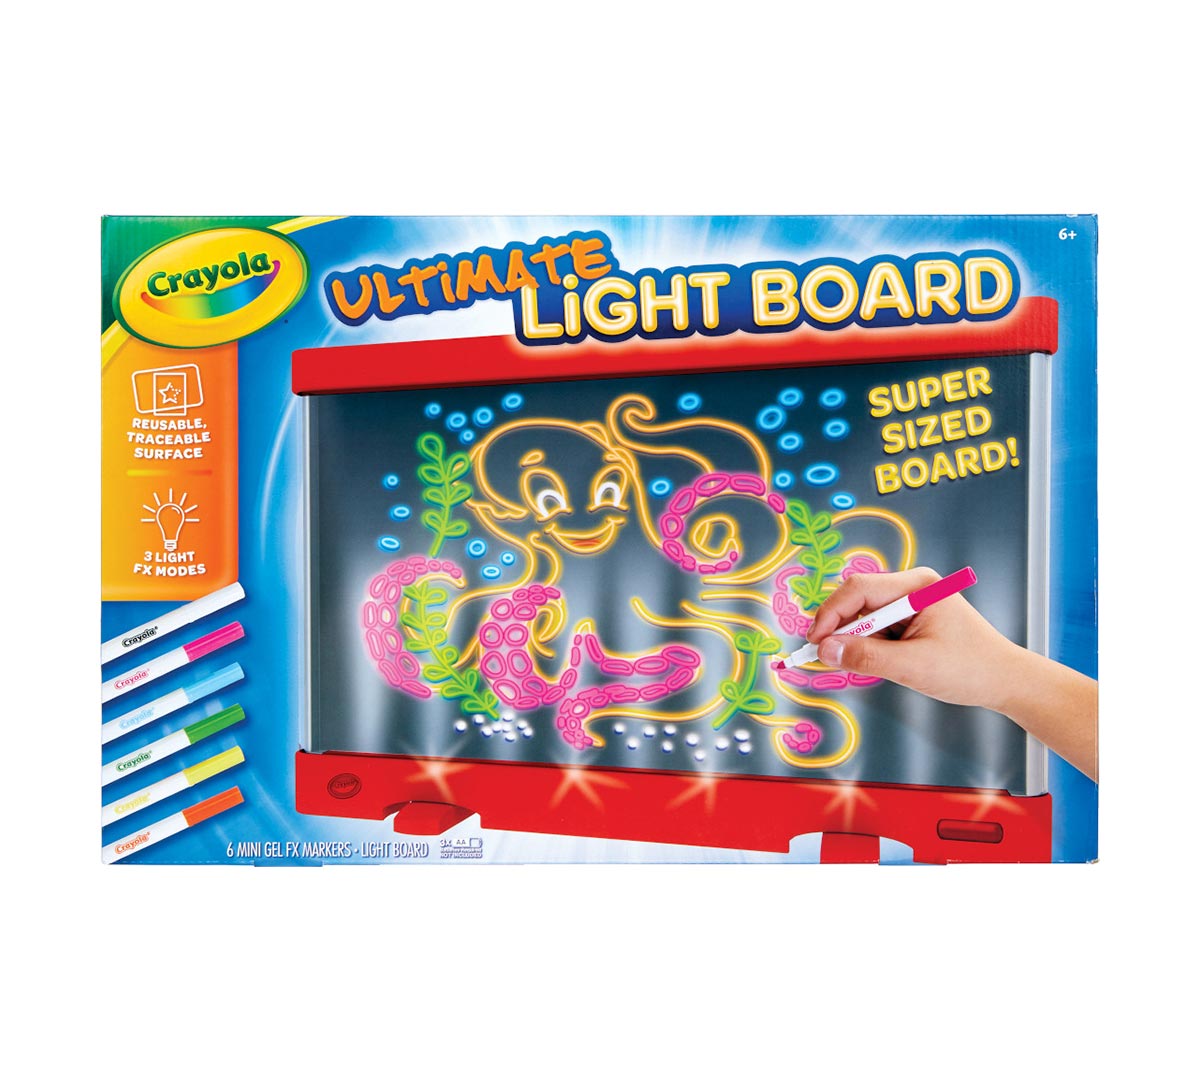 Crayola ultimate light board drawing tablet reviews